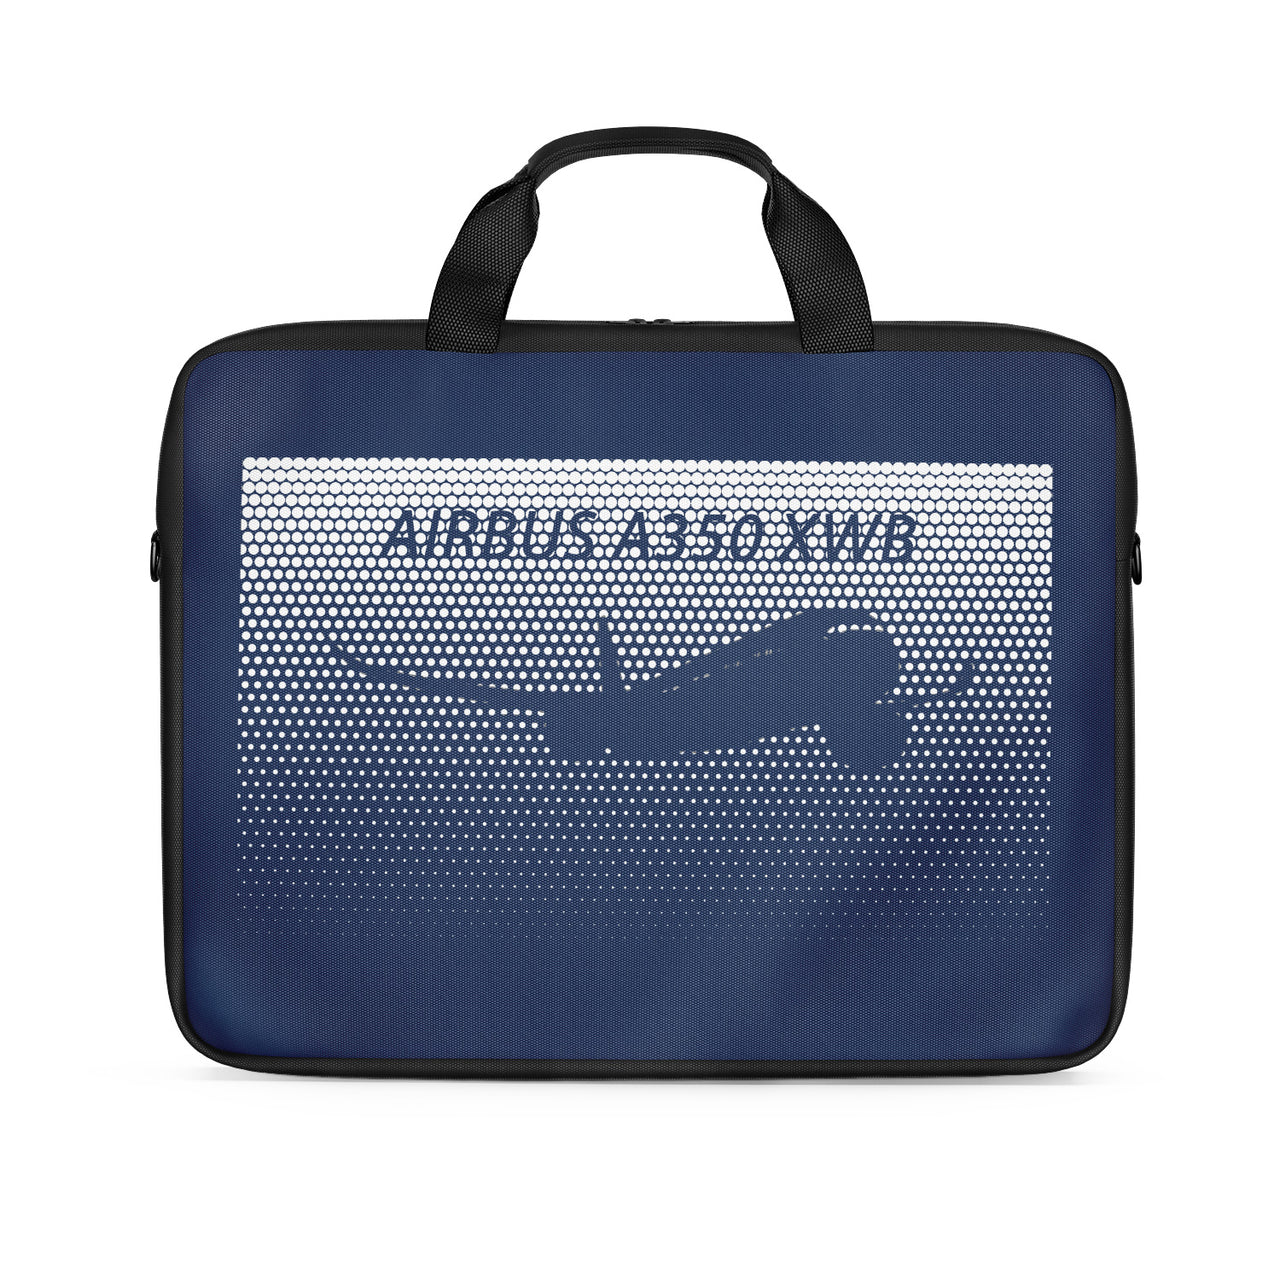 Airbus A350XWB & Dots Designed Laptop & Tablet Bags